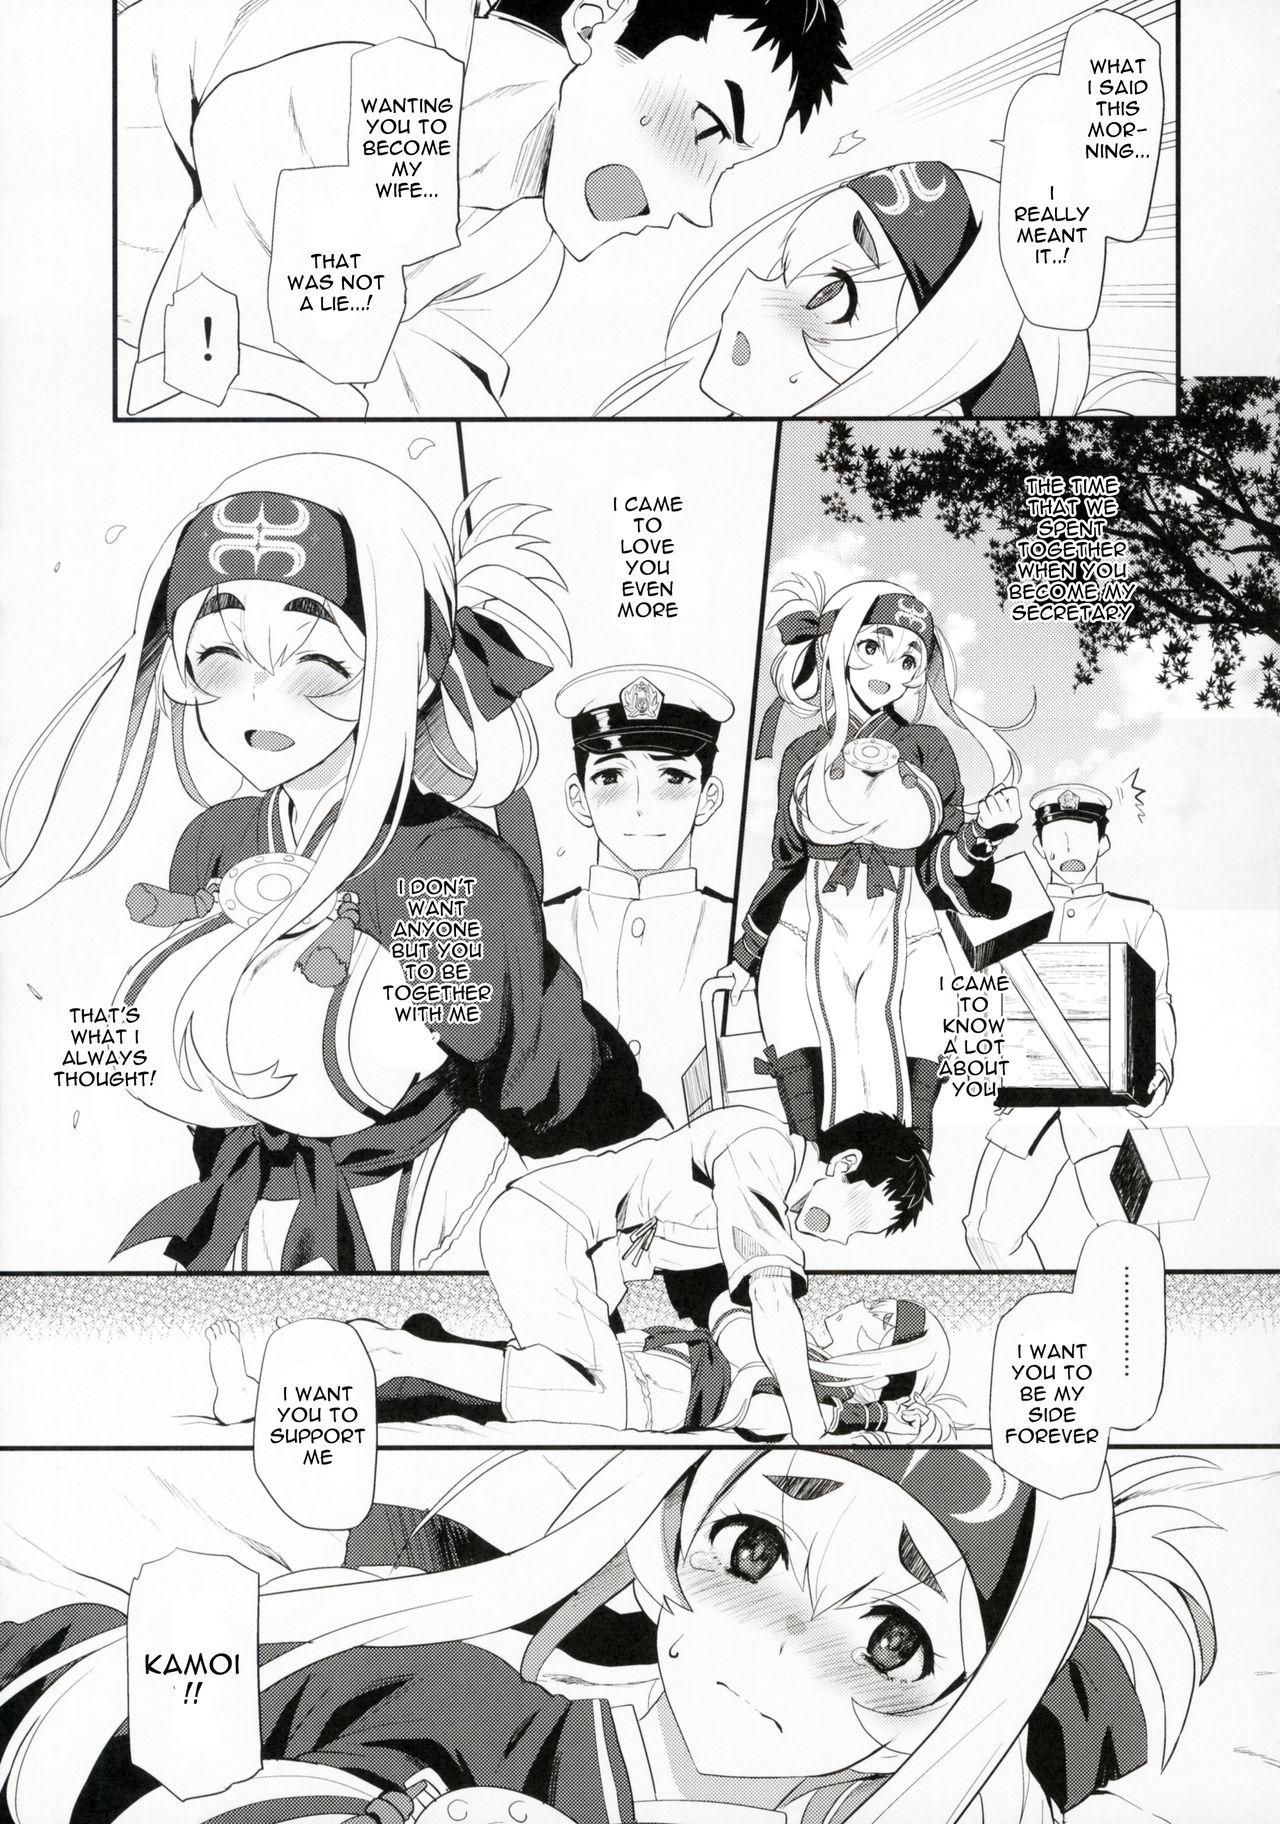 Sesso Hascup - Kantai collection  - Page 10